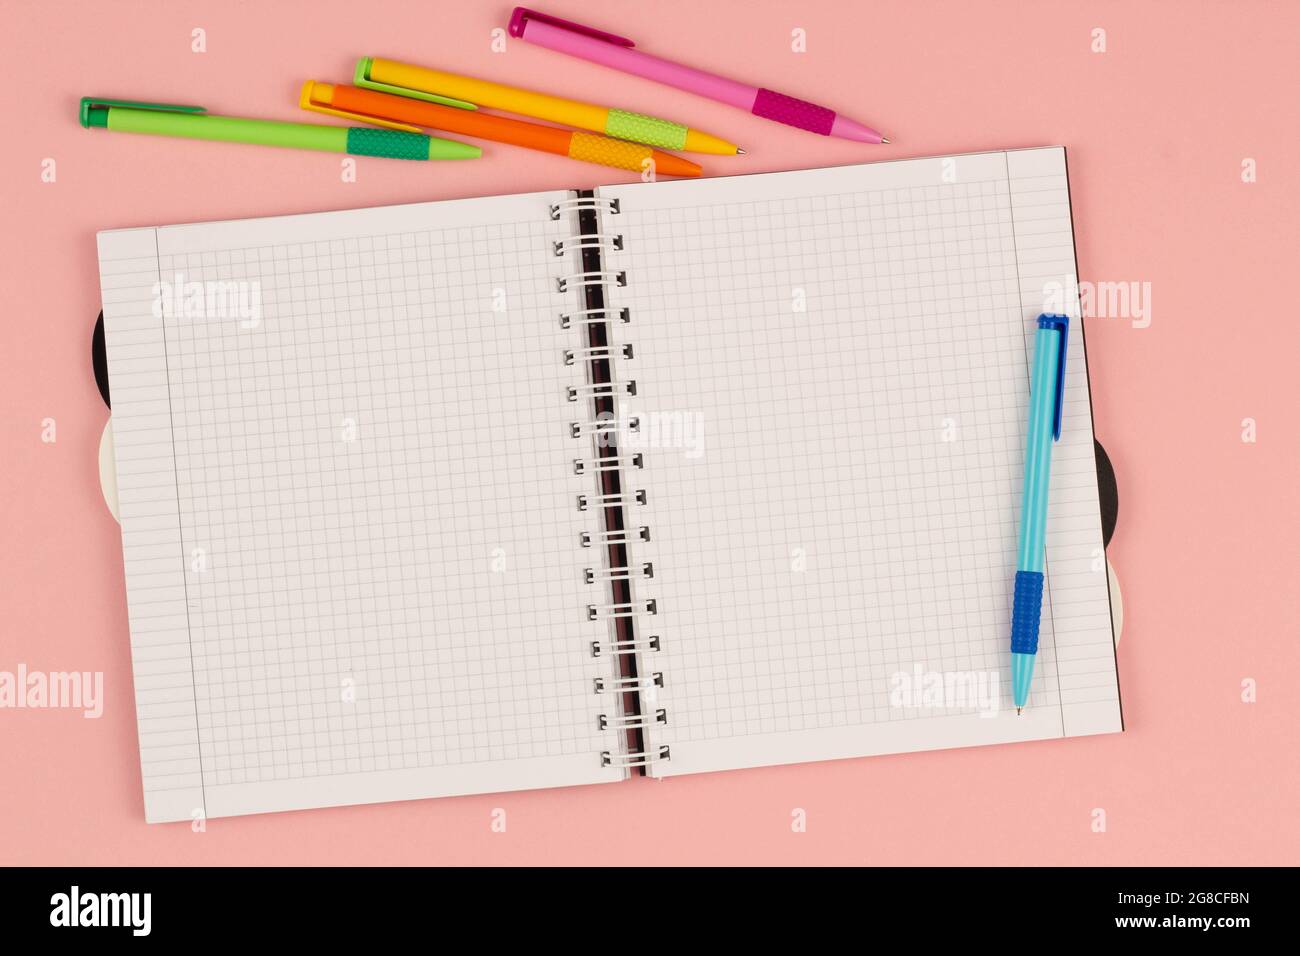 Open school squared notebook and colorful pens on the pink background. Blank white sheet of paper book on the table. Office supplies on the desktop Stock Photo